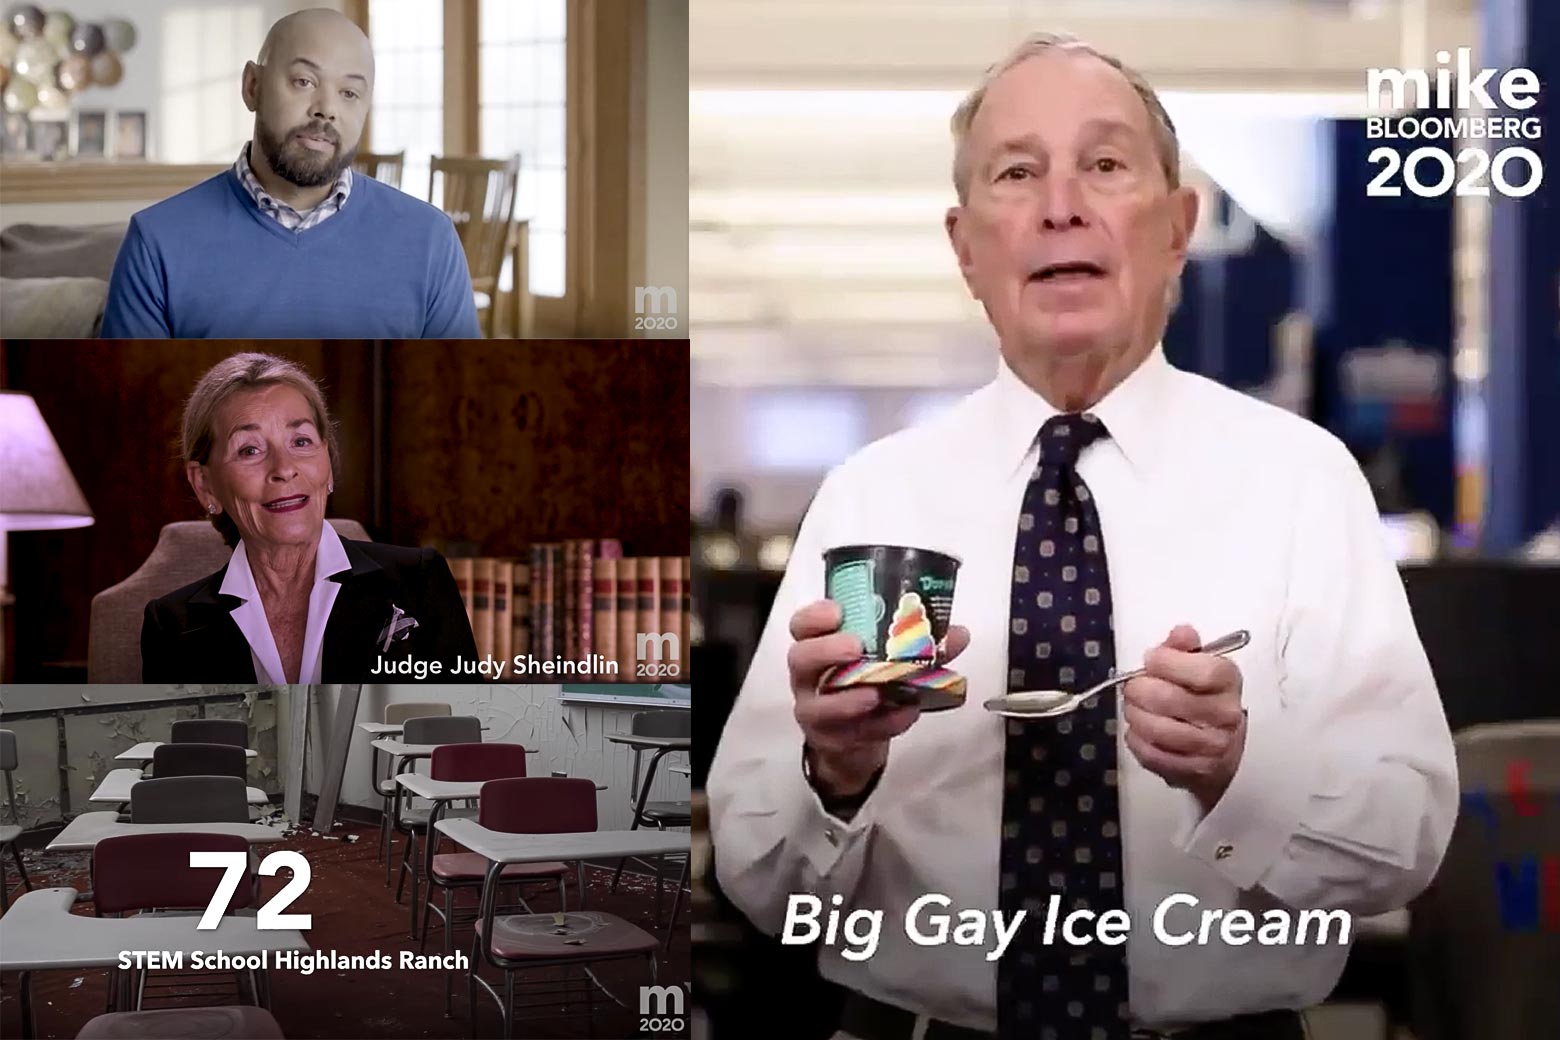 Screenshots of Mike Bloomberg ads, including one of Judge Judy, one of an empty classroom with the number 72 imposed over it, and one of the candidate eating Big Gay Ice Cream.